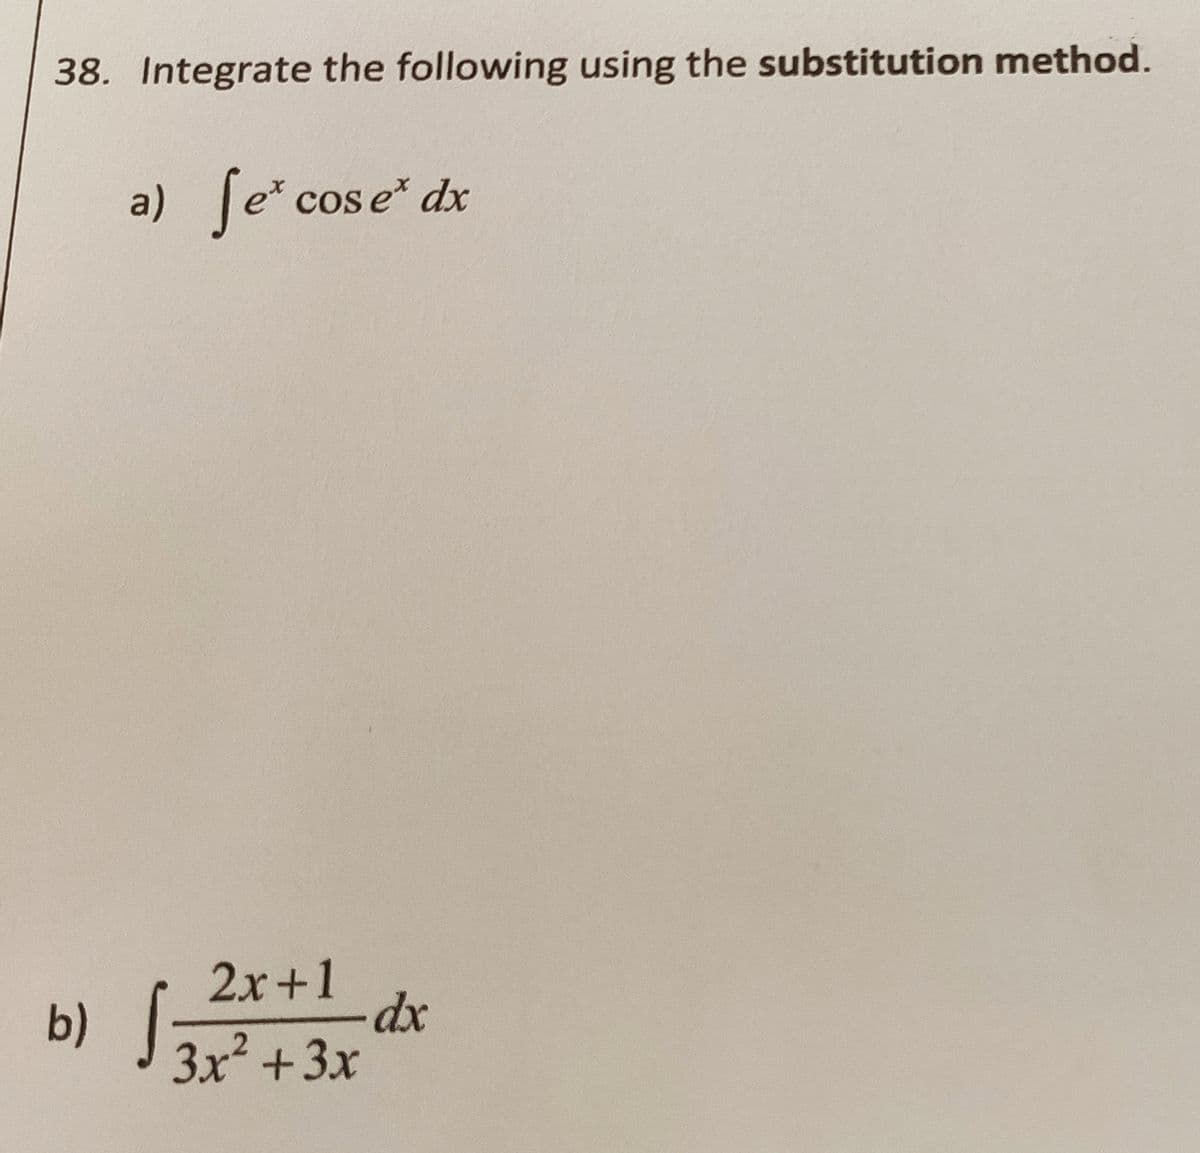 38. Integrate the following using the substitution method.
a)
e* cos e dx
2x+1
b)
3x +3x
